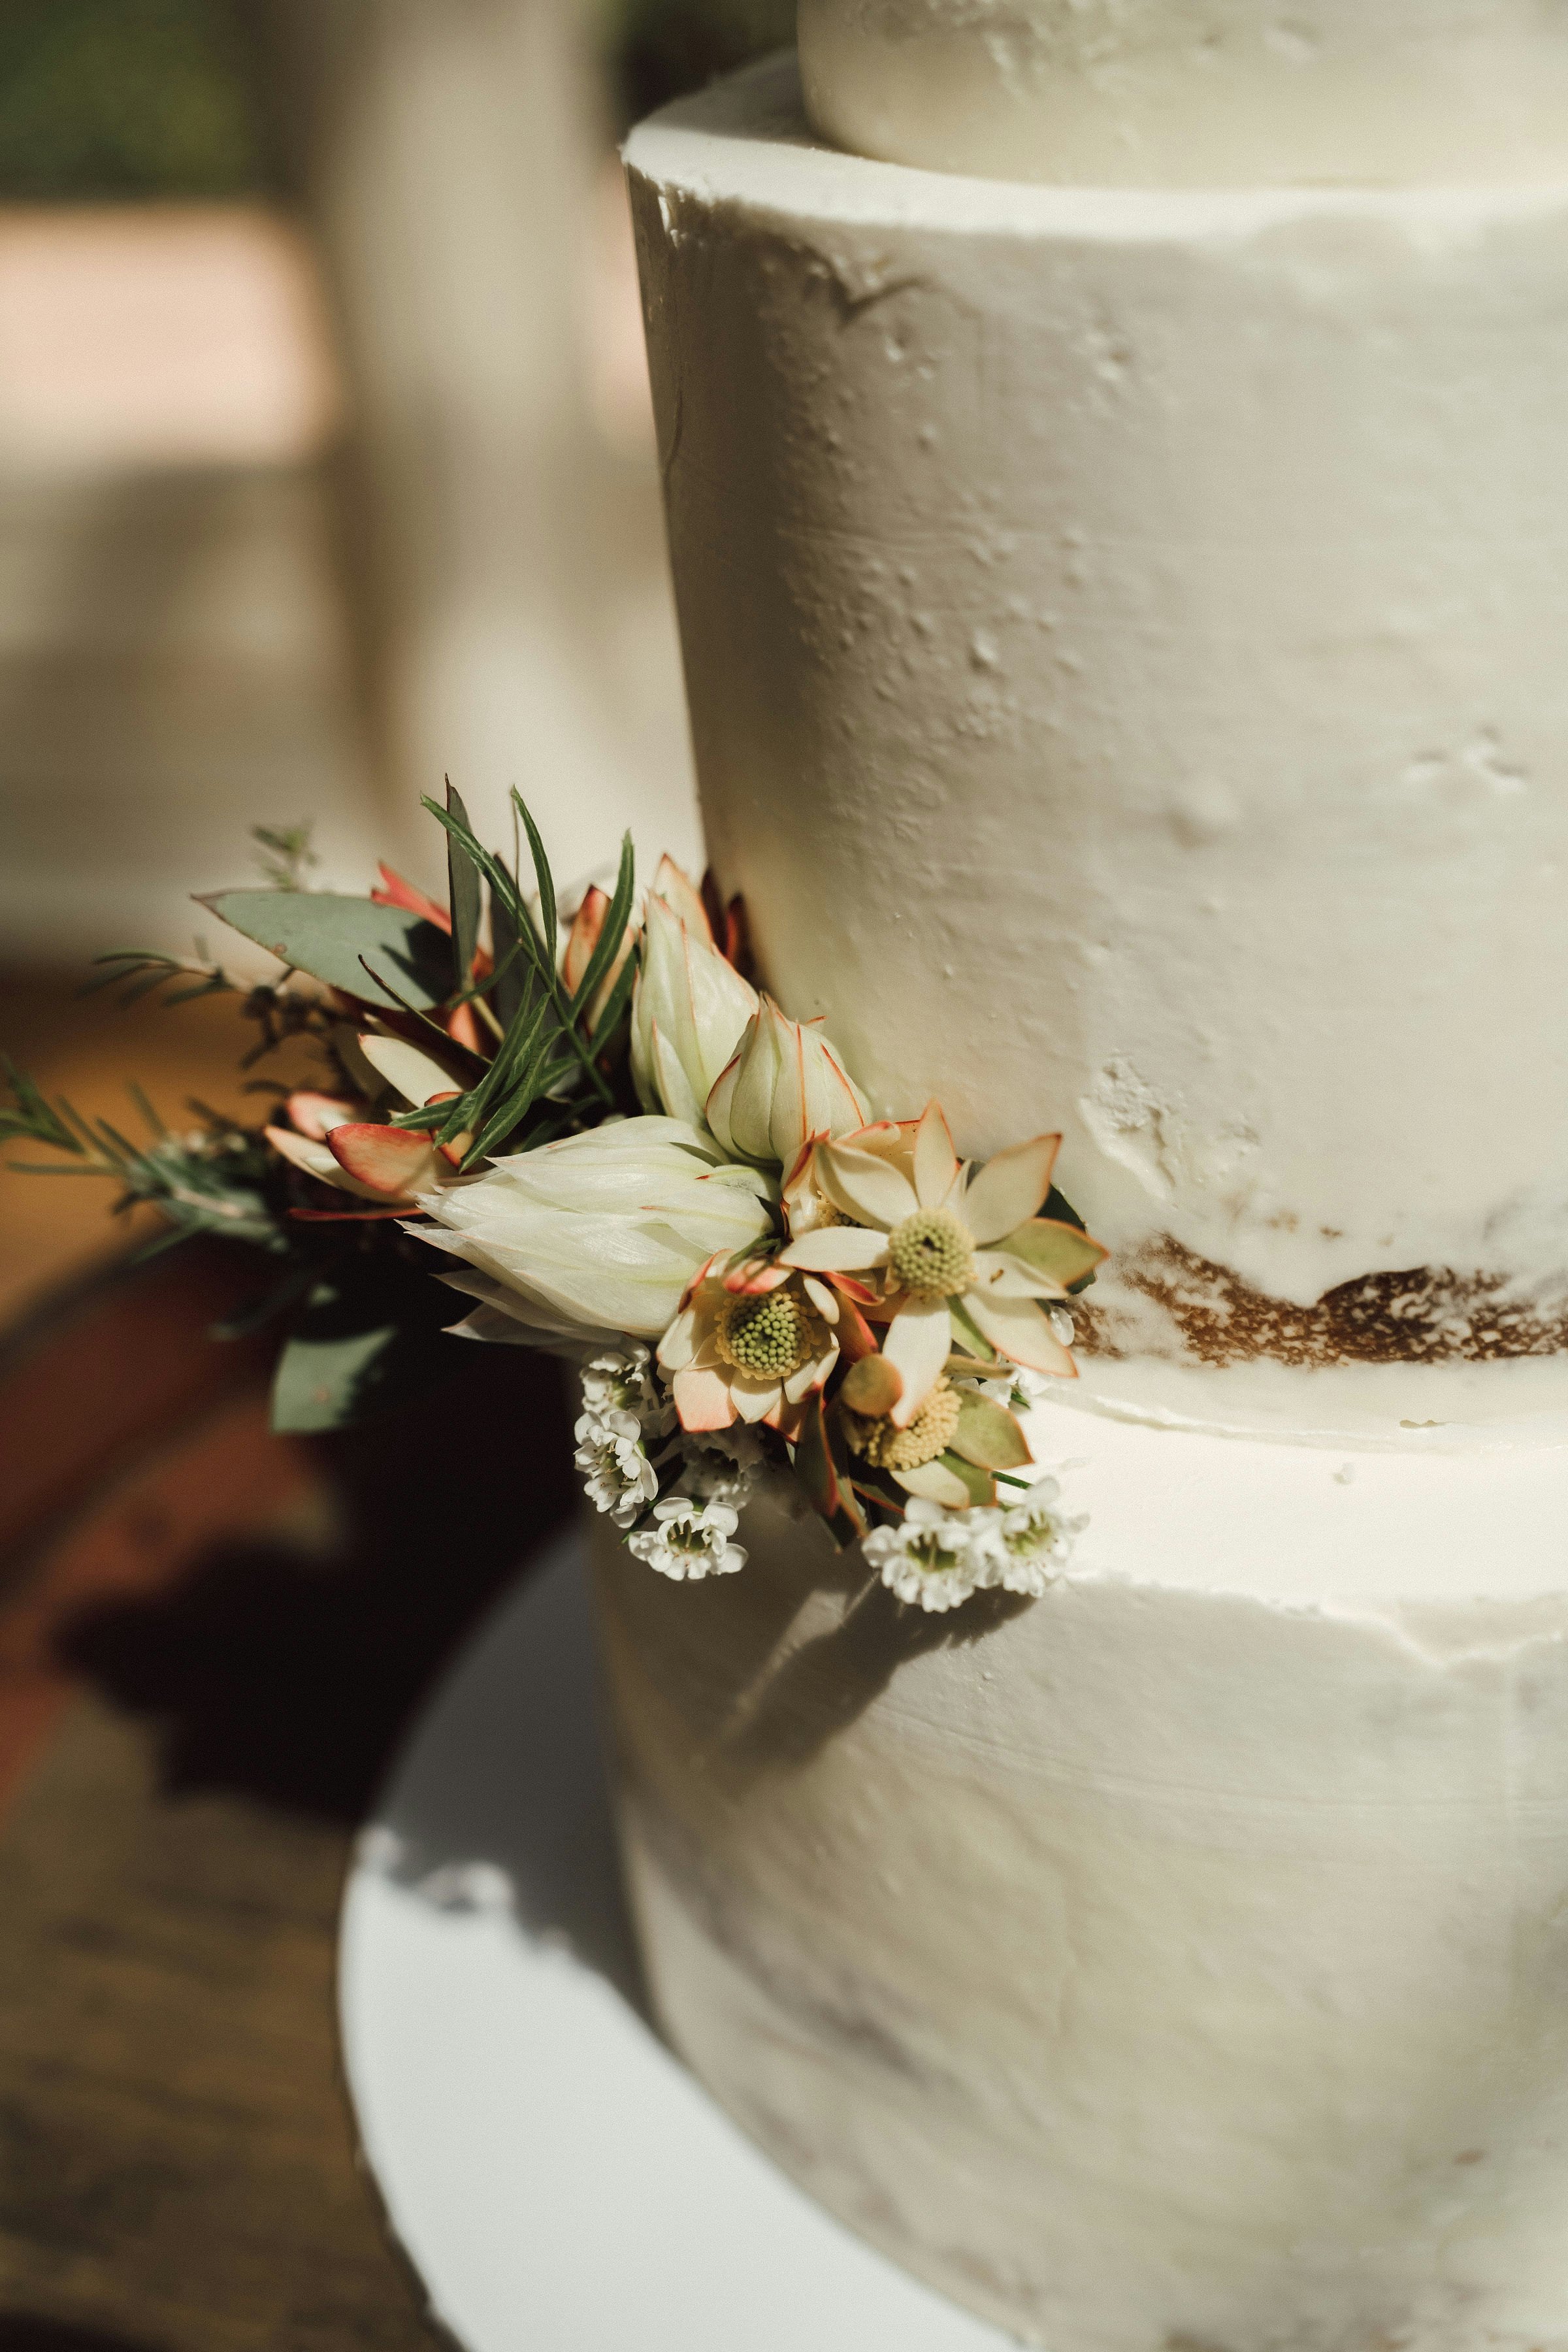 Wedding cake with native floral decorations 